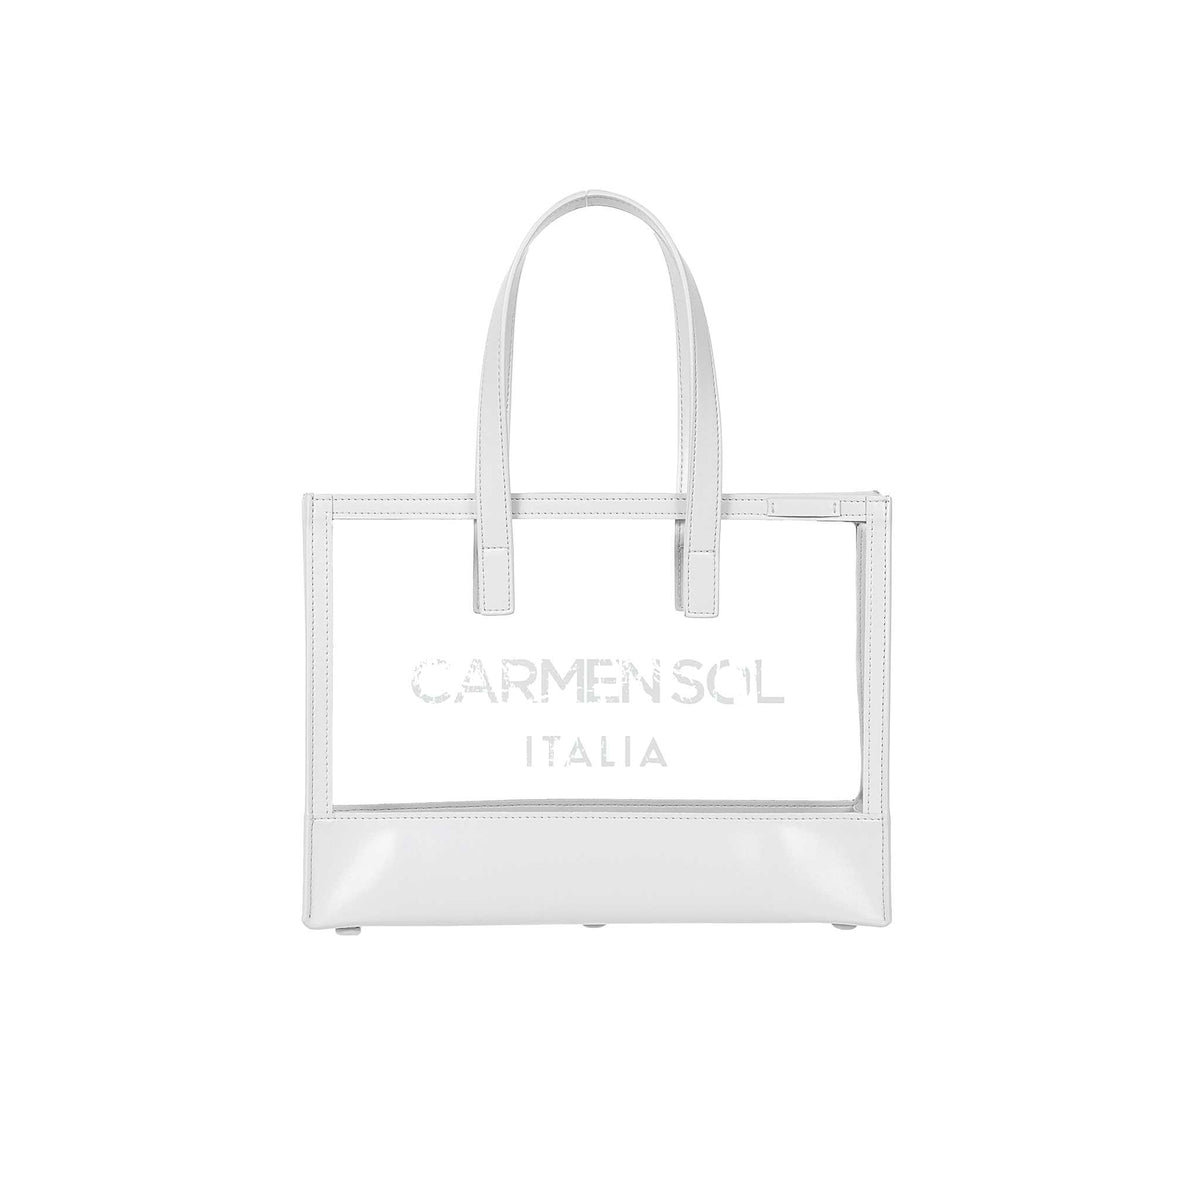 Made in Italy Carmen Sol clear beach bags for women in color white